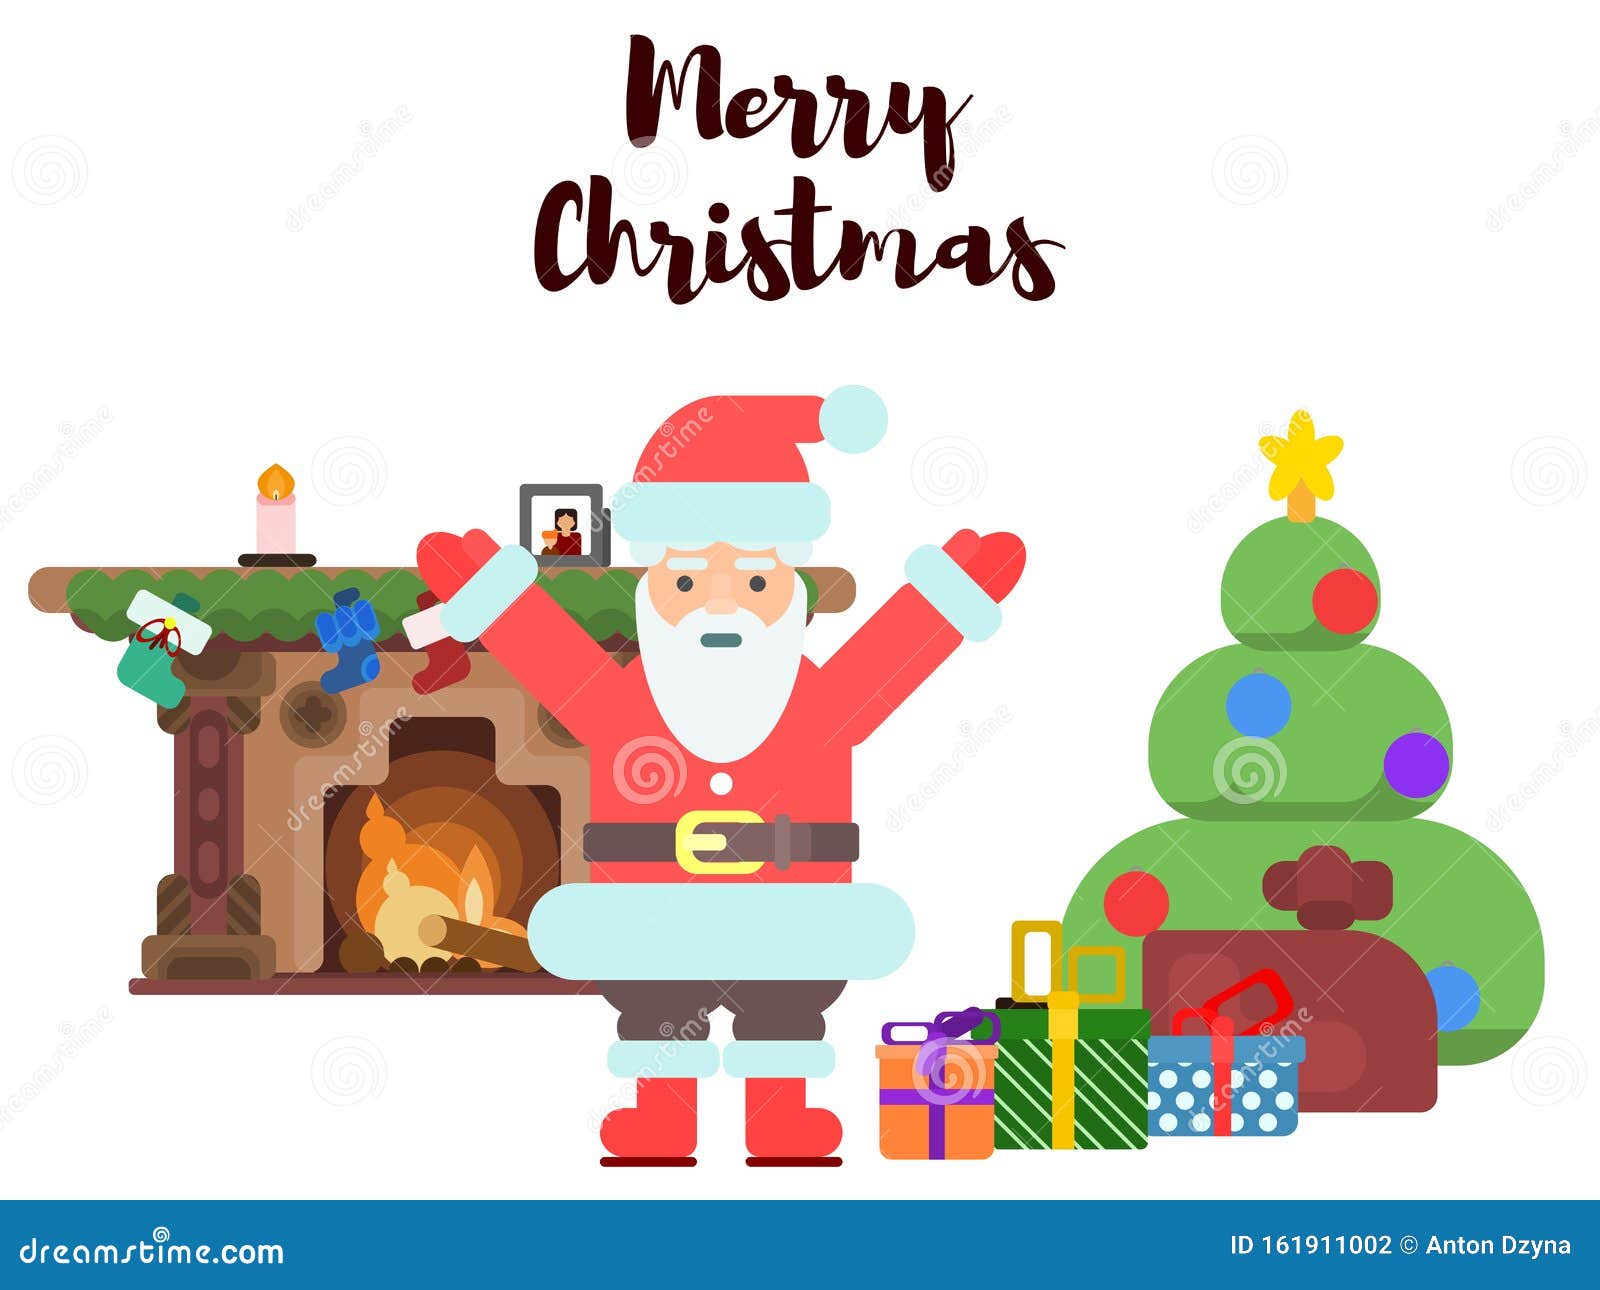 Santa Claus Near the Fireplace and Christmas Tree Stock Illustration ...